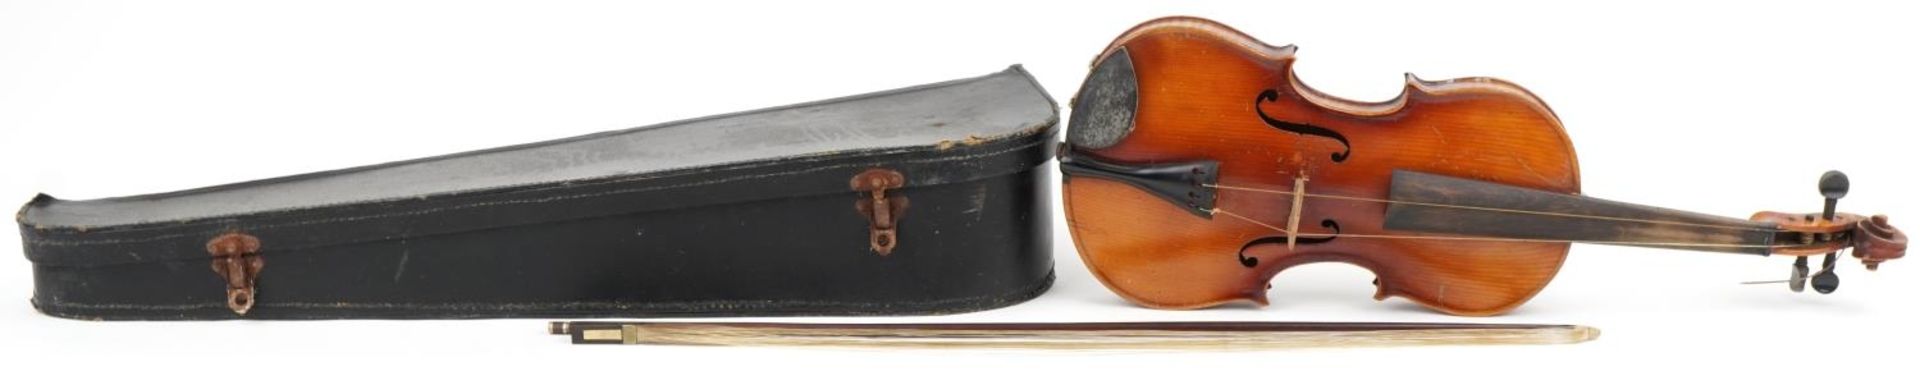 Old wooden violin with violin bow and case, the violin bearing an Antonio Stradivarius label, the - Image 4 of 5